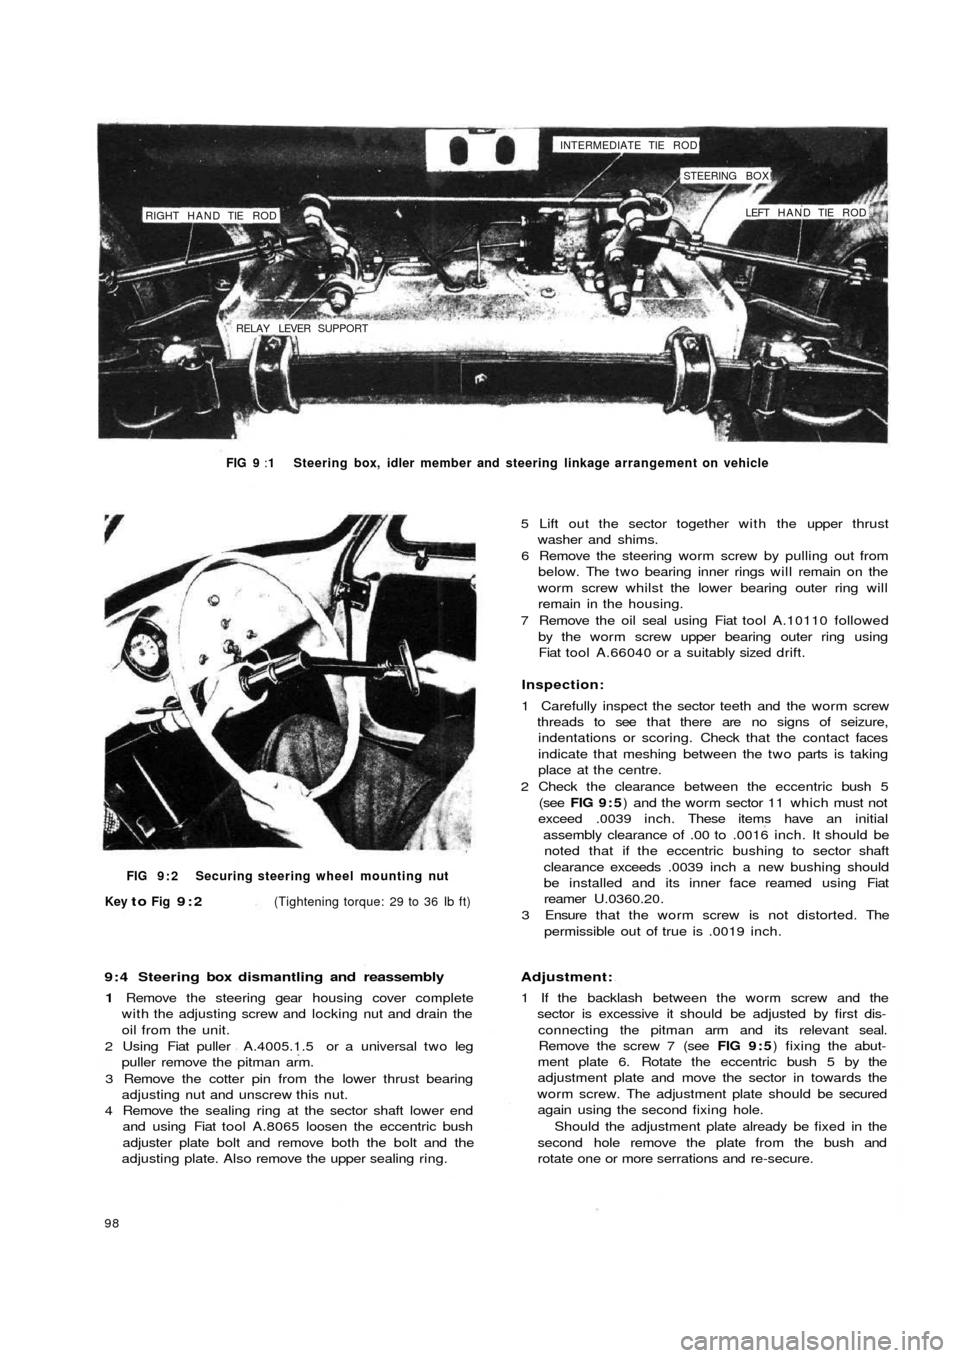 FIAT 500 1968 1.G Workshop Manual RIGHT HAND TIE  ROD
RELAY LEVER  SUPPORTINTERMEDIATE TIE ROD!
STEERING BOX!
LEFT  HAND TIE  ROD
FIG 9 :1 Steering box, idler member and steering linkage arrangement on vehicle
FIG 9 : 2  Securing stee